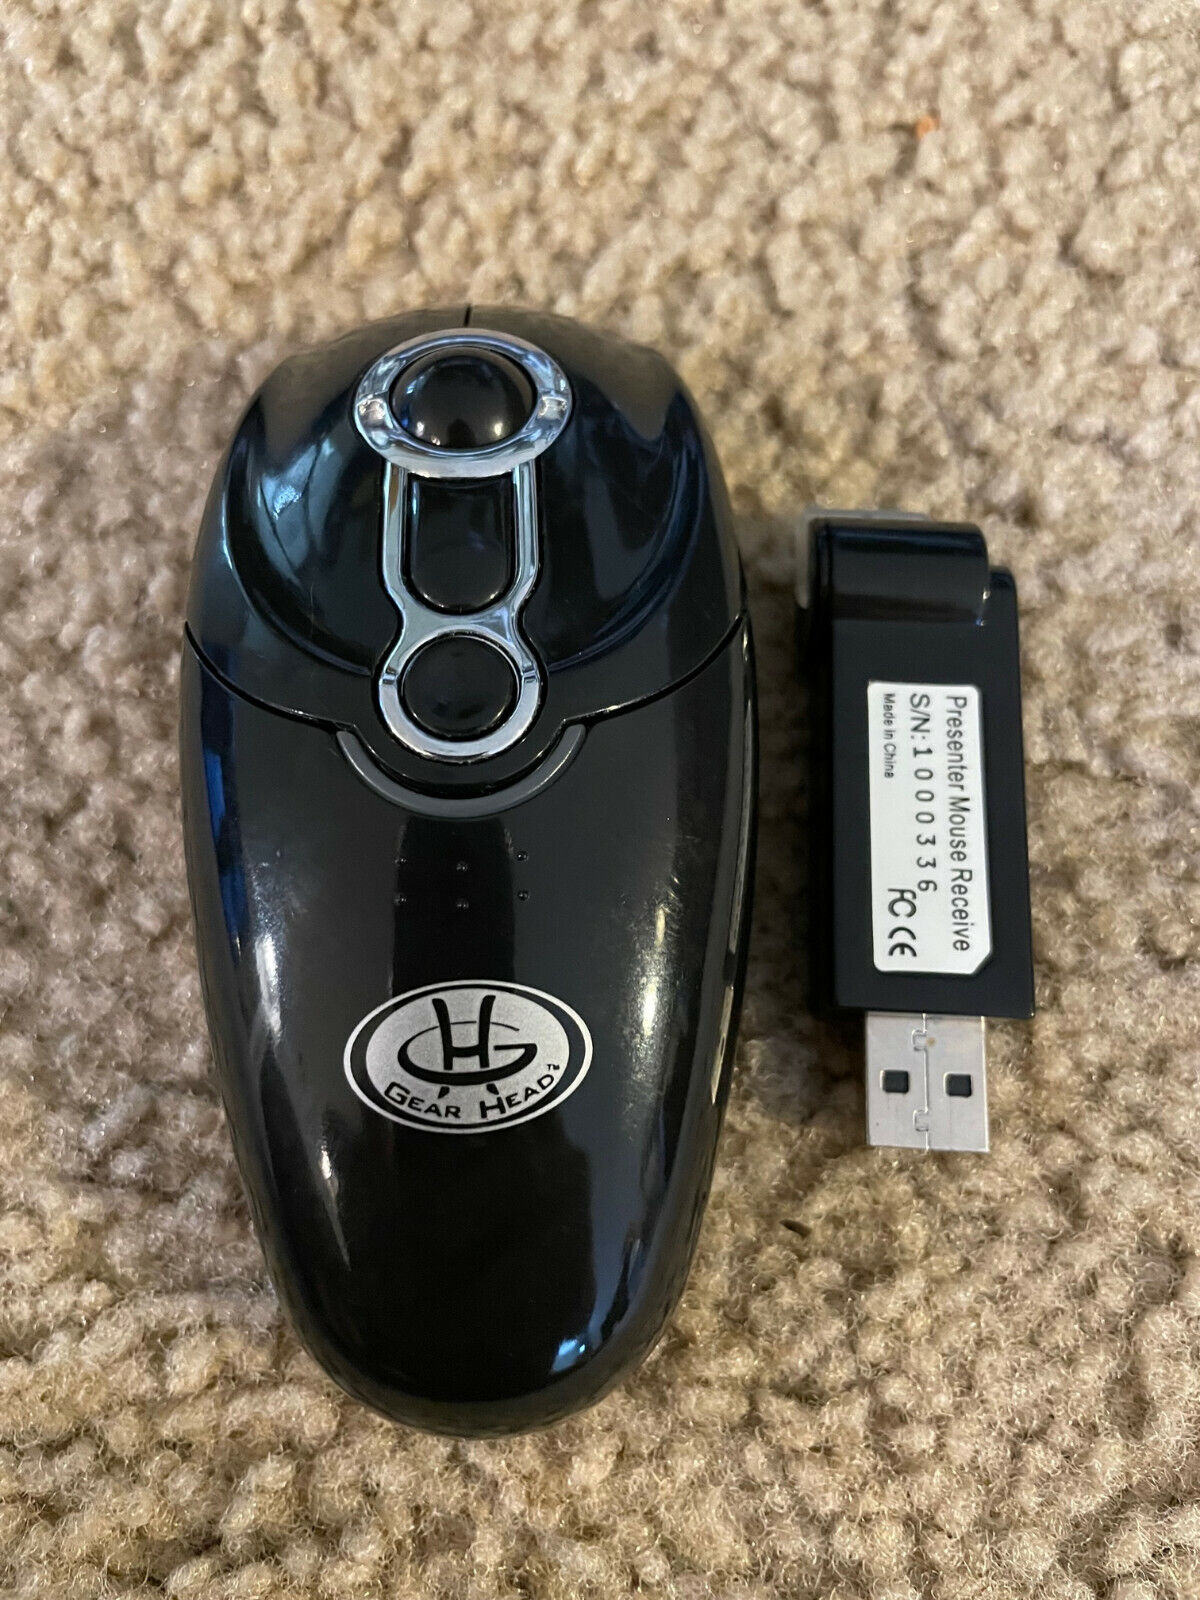 Gear Head Mouse with Laser Optical PPT Presenter Mouse w/ USB Receiver